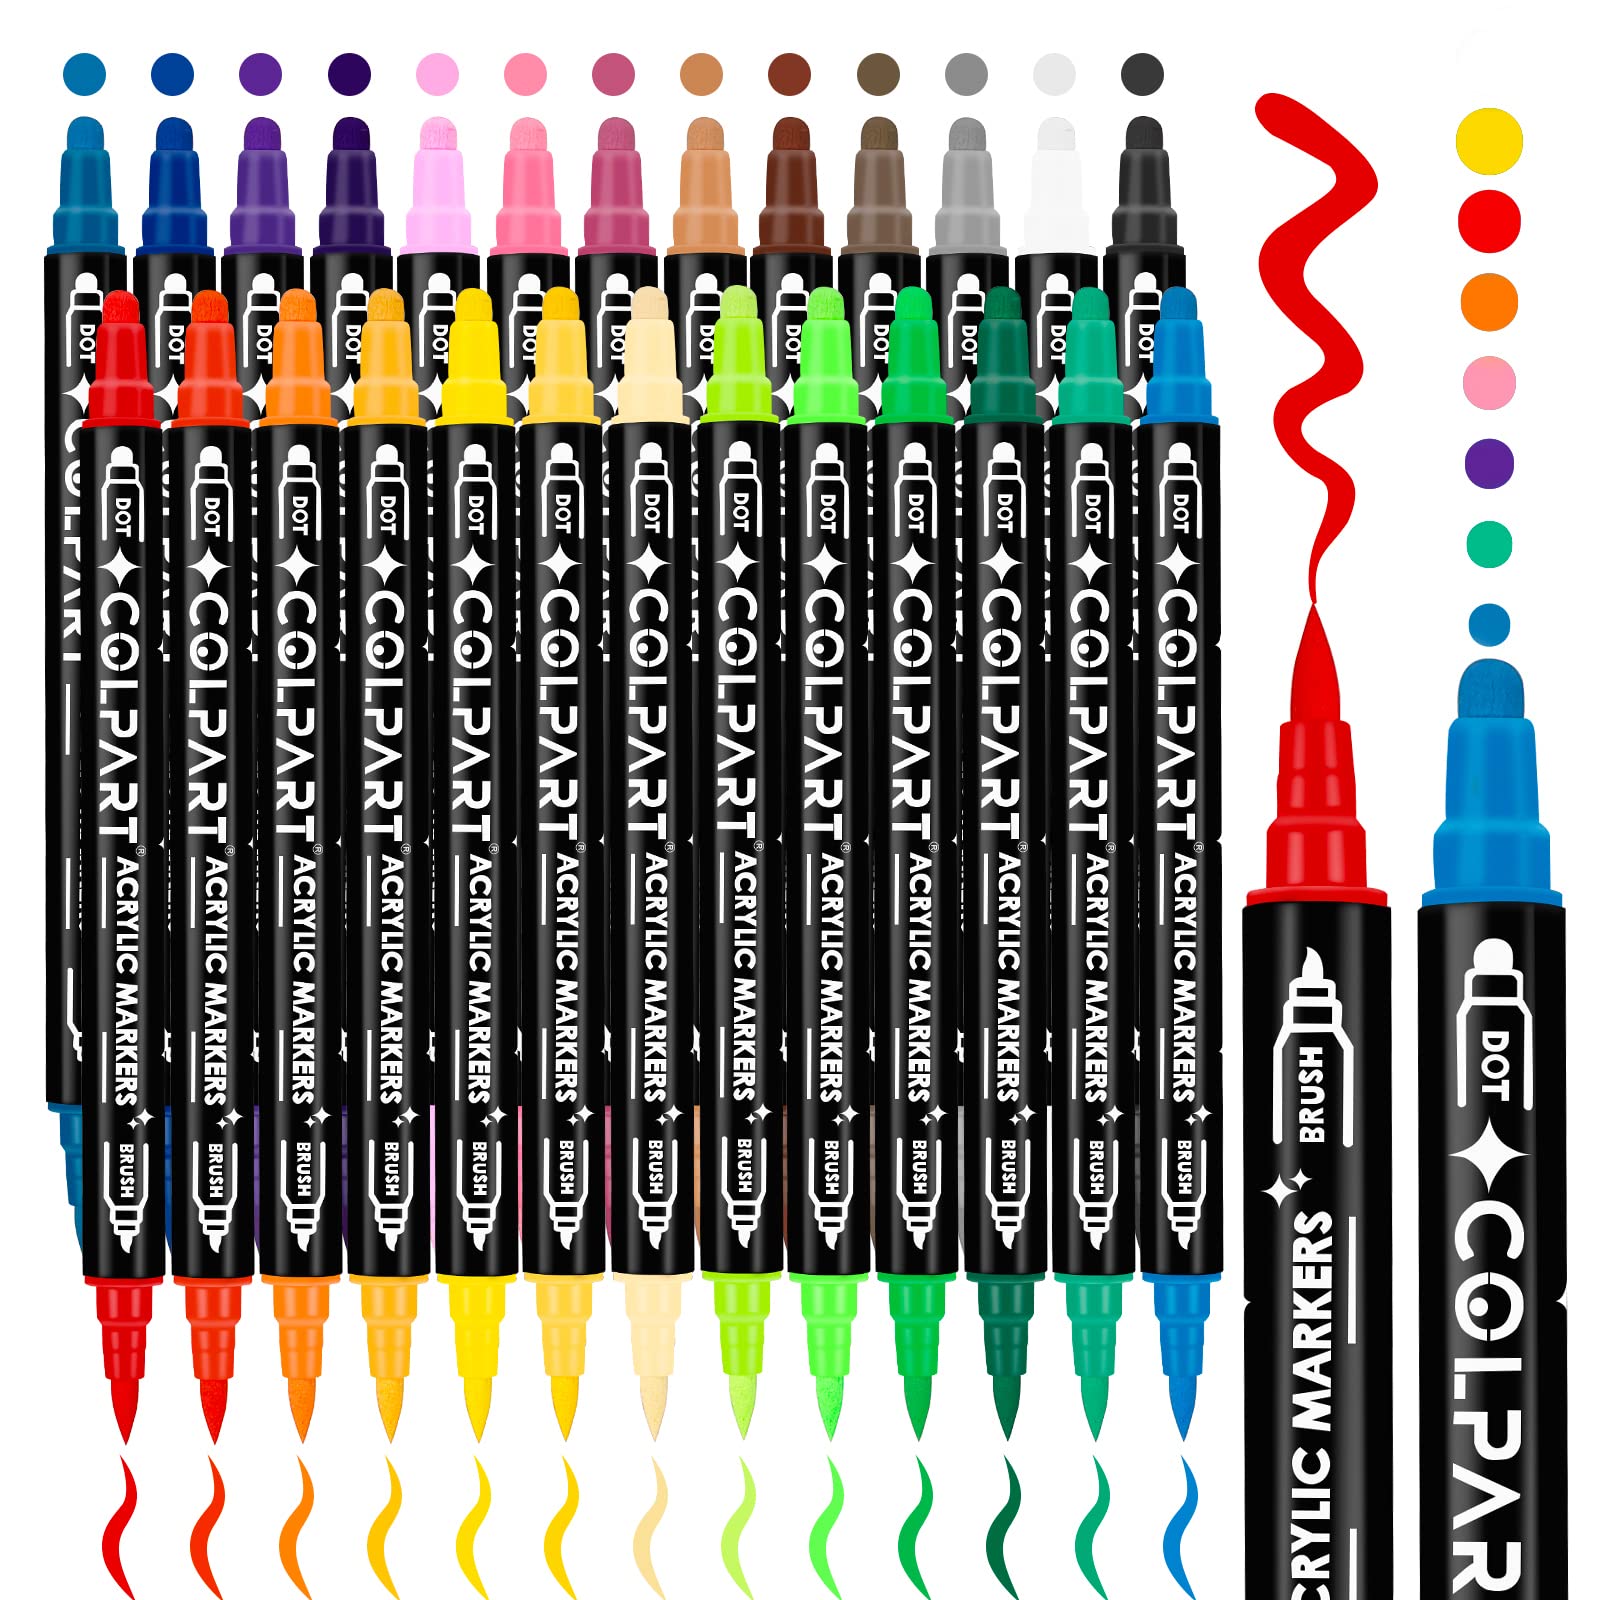 colpart 80 Colors Alcohol Markers Dual Tip Art Markers for Kids